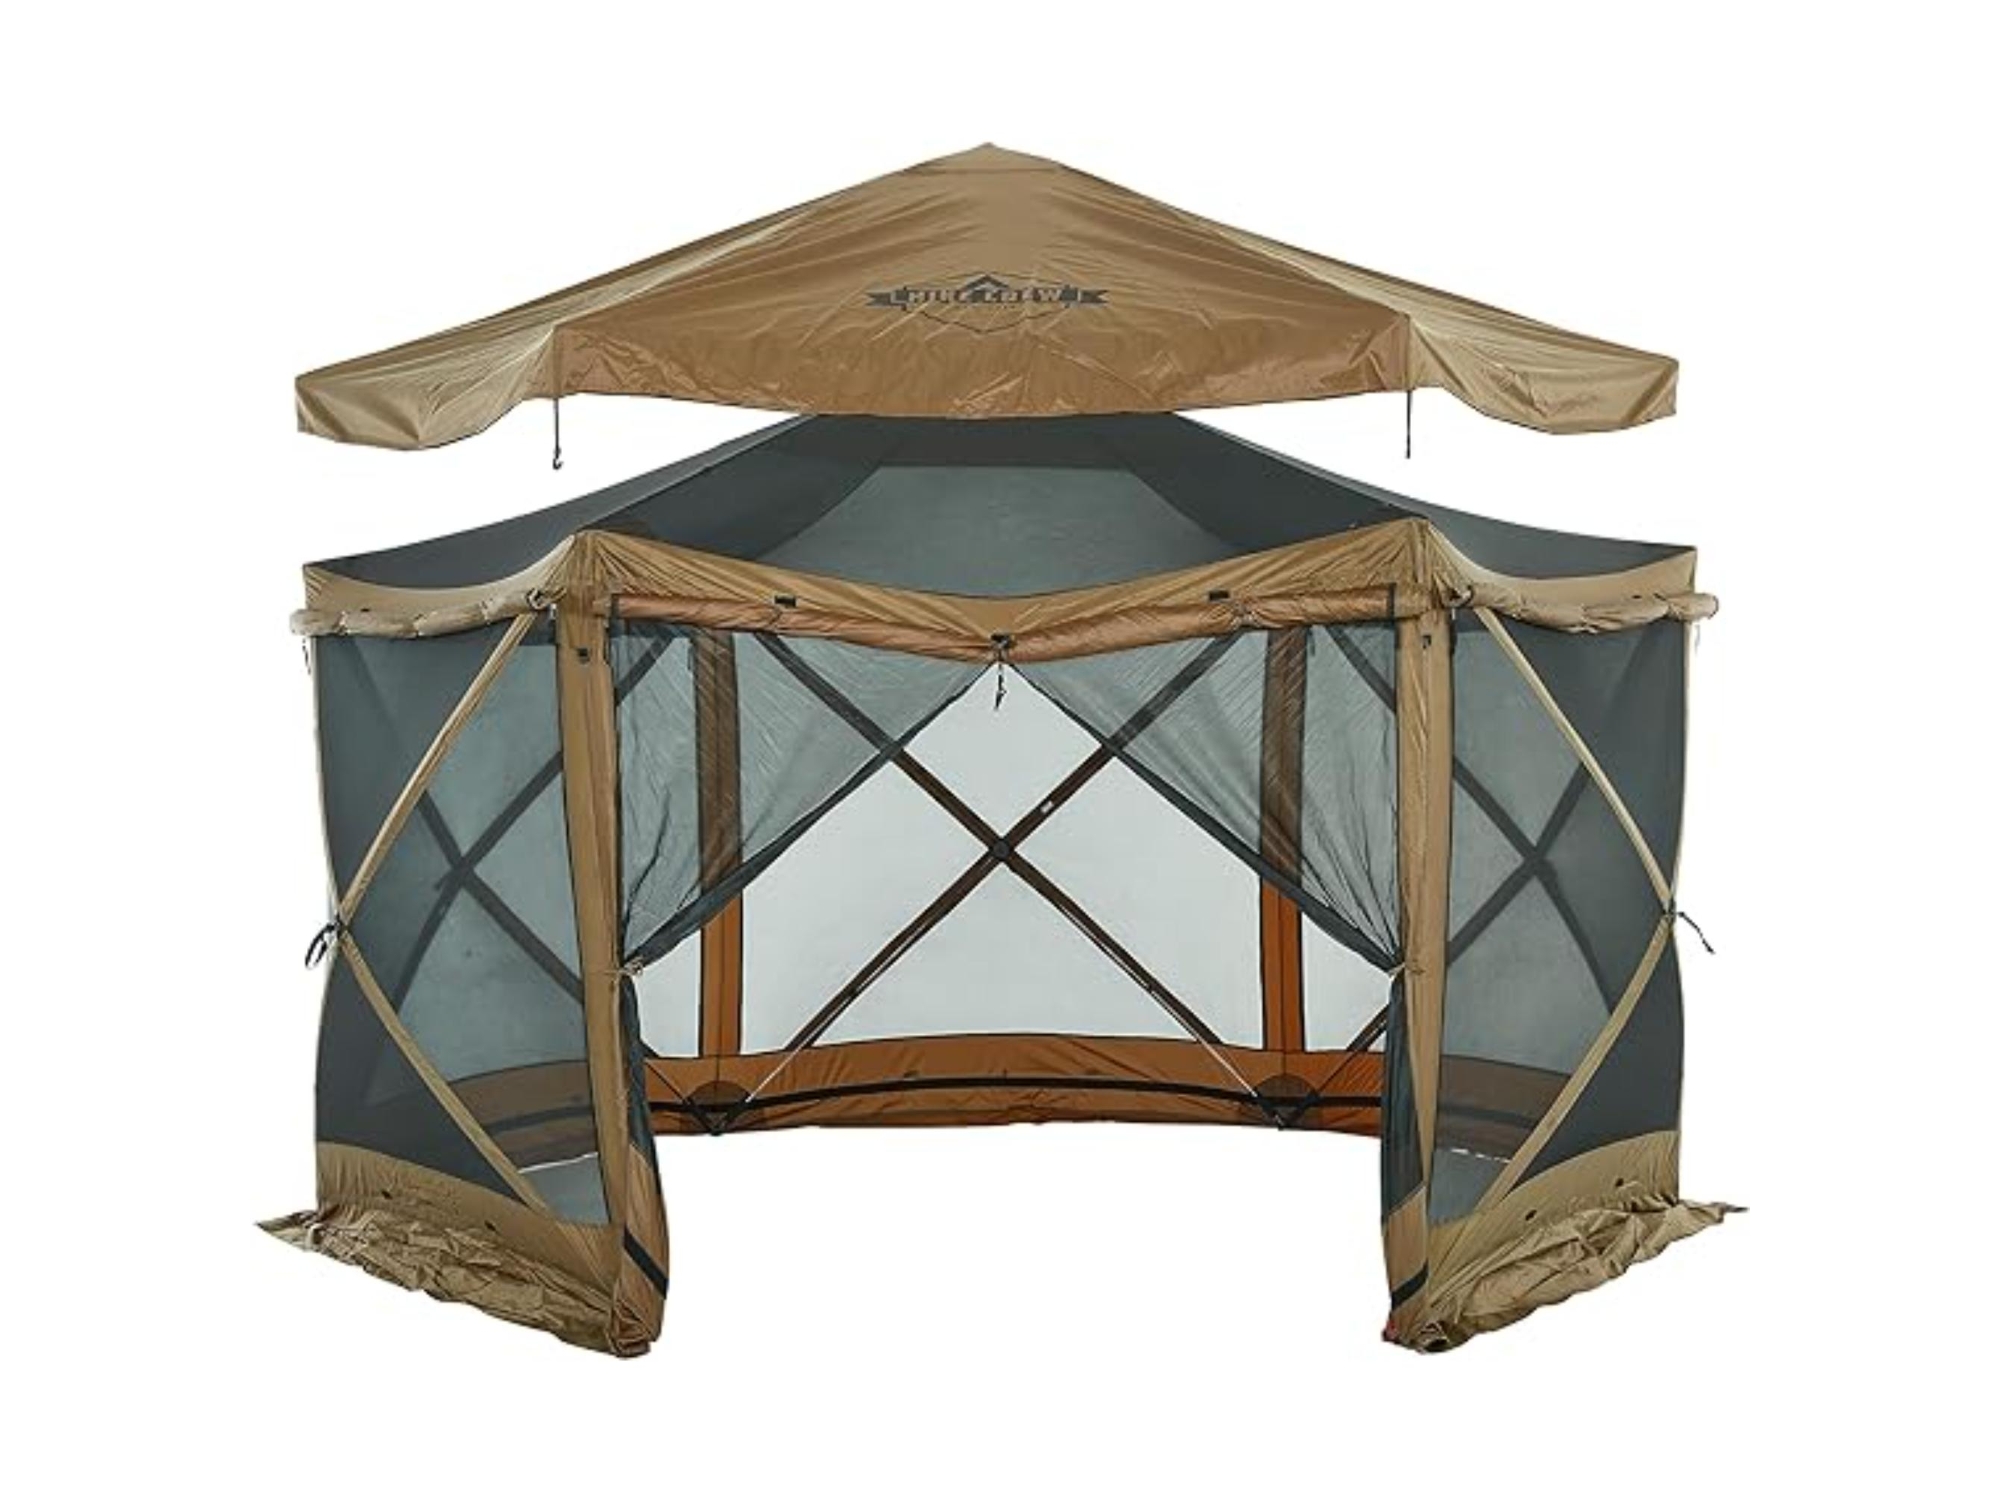 Hike Crew 13 x 13 Screened Roof Pop Up Gazebo Tent (6-Sides), Brown